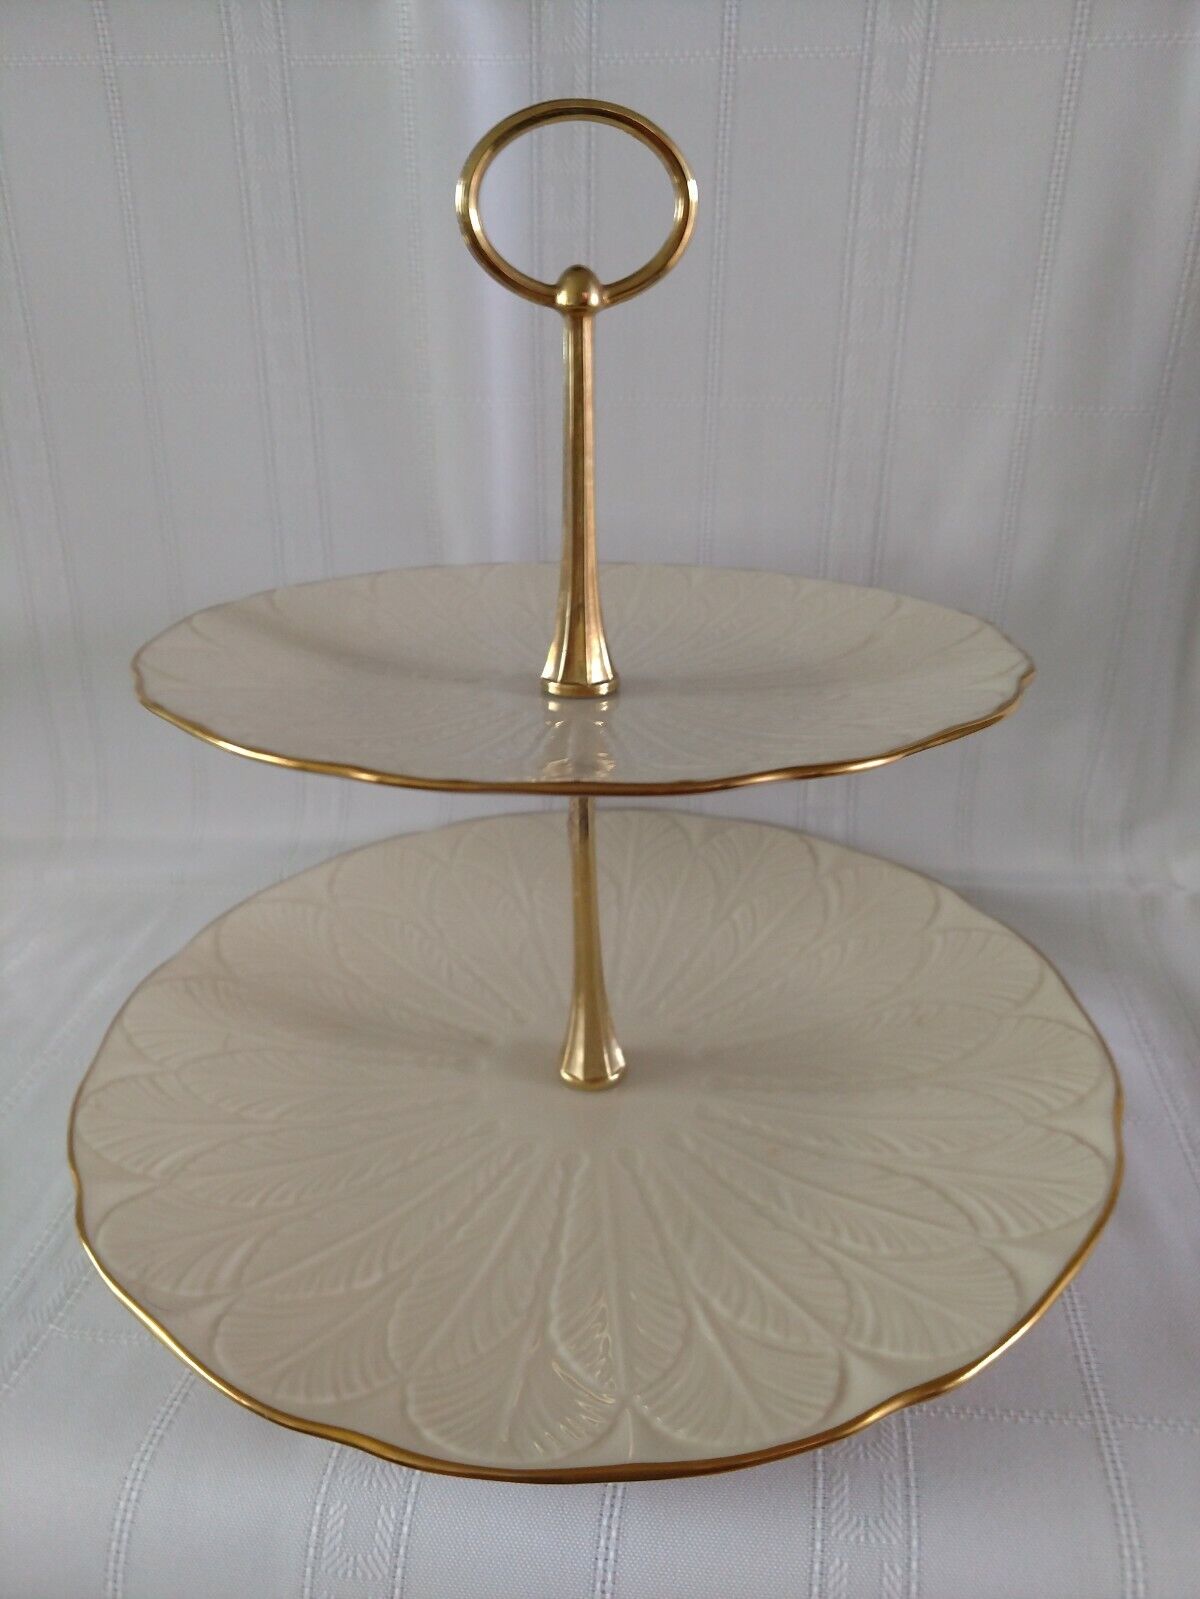 Vintage Lenox Two-Tiered Serving Tray- Ivory Bone China-24K Gold Rimmed-Embossed